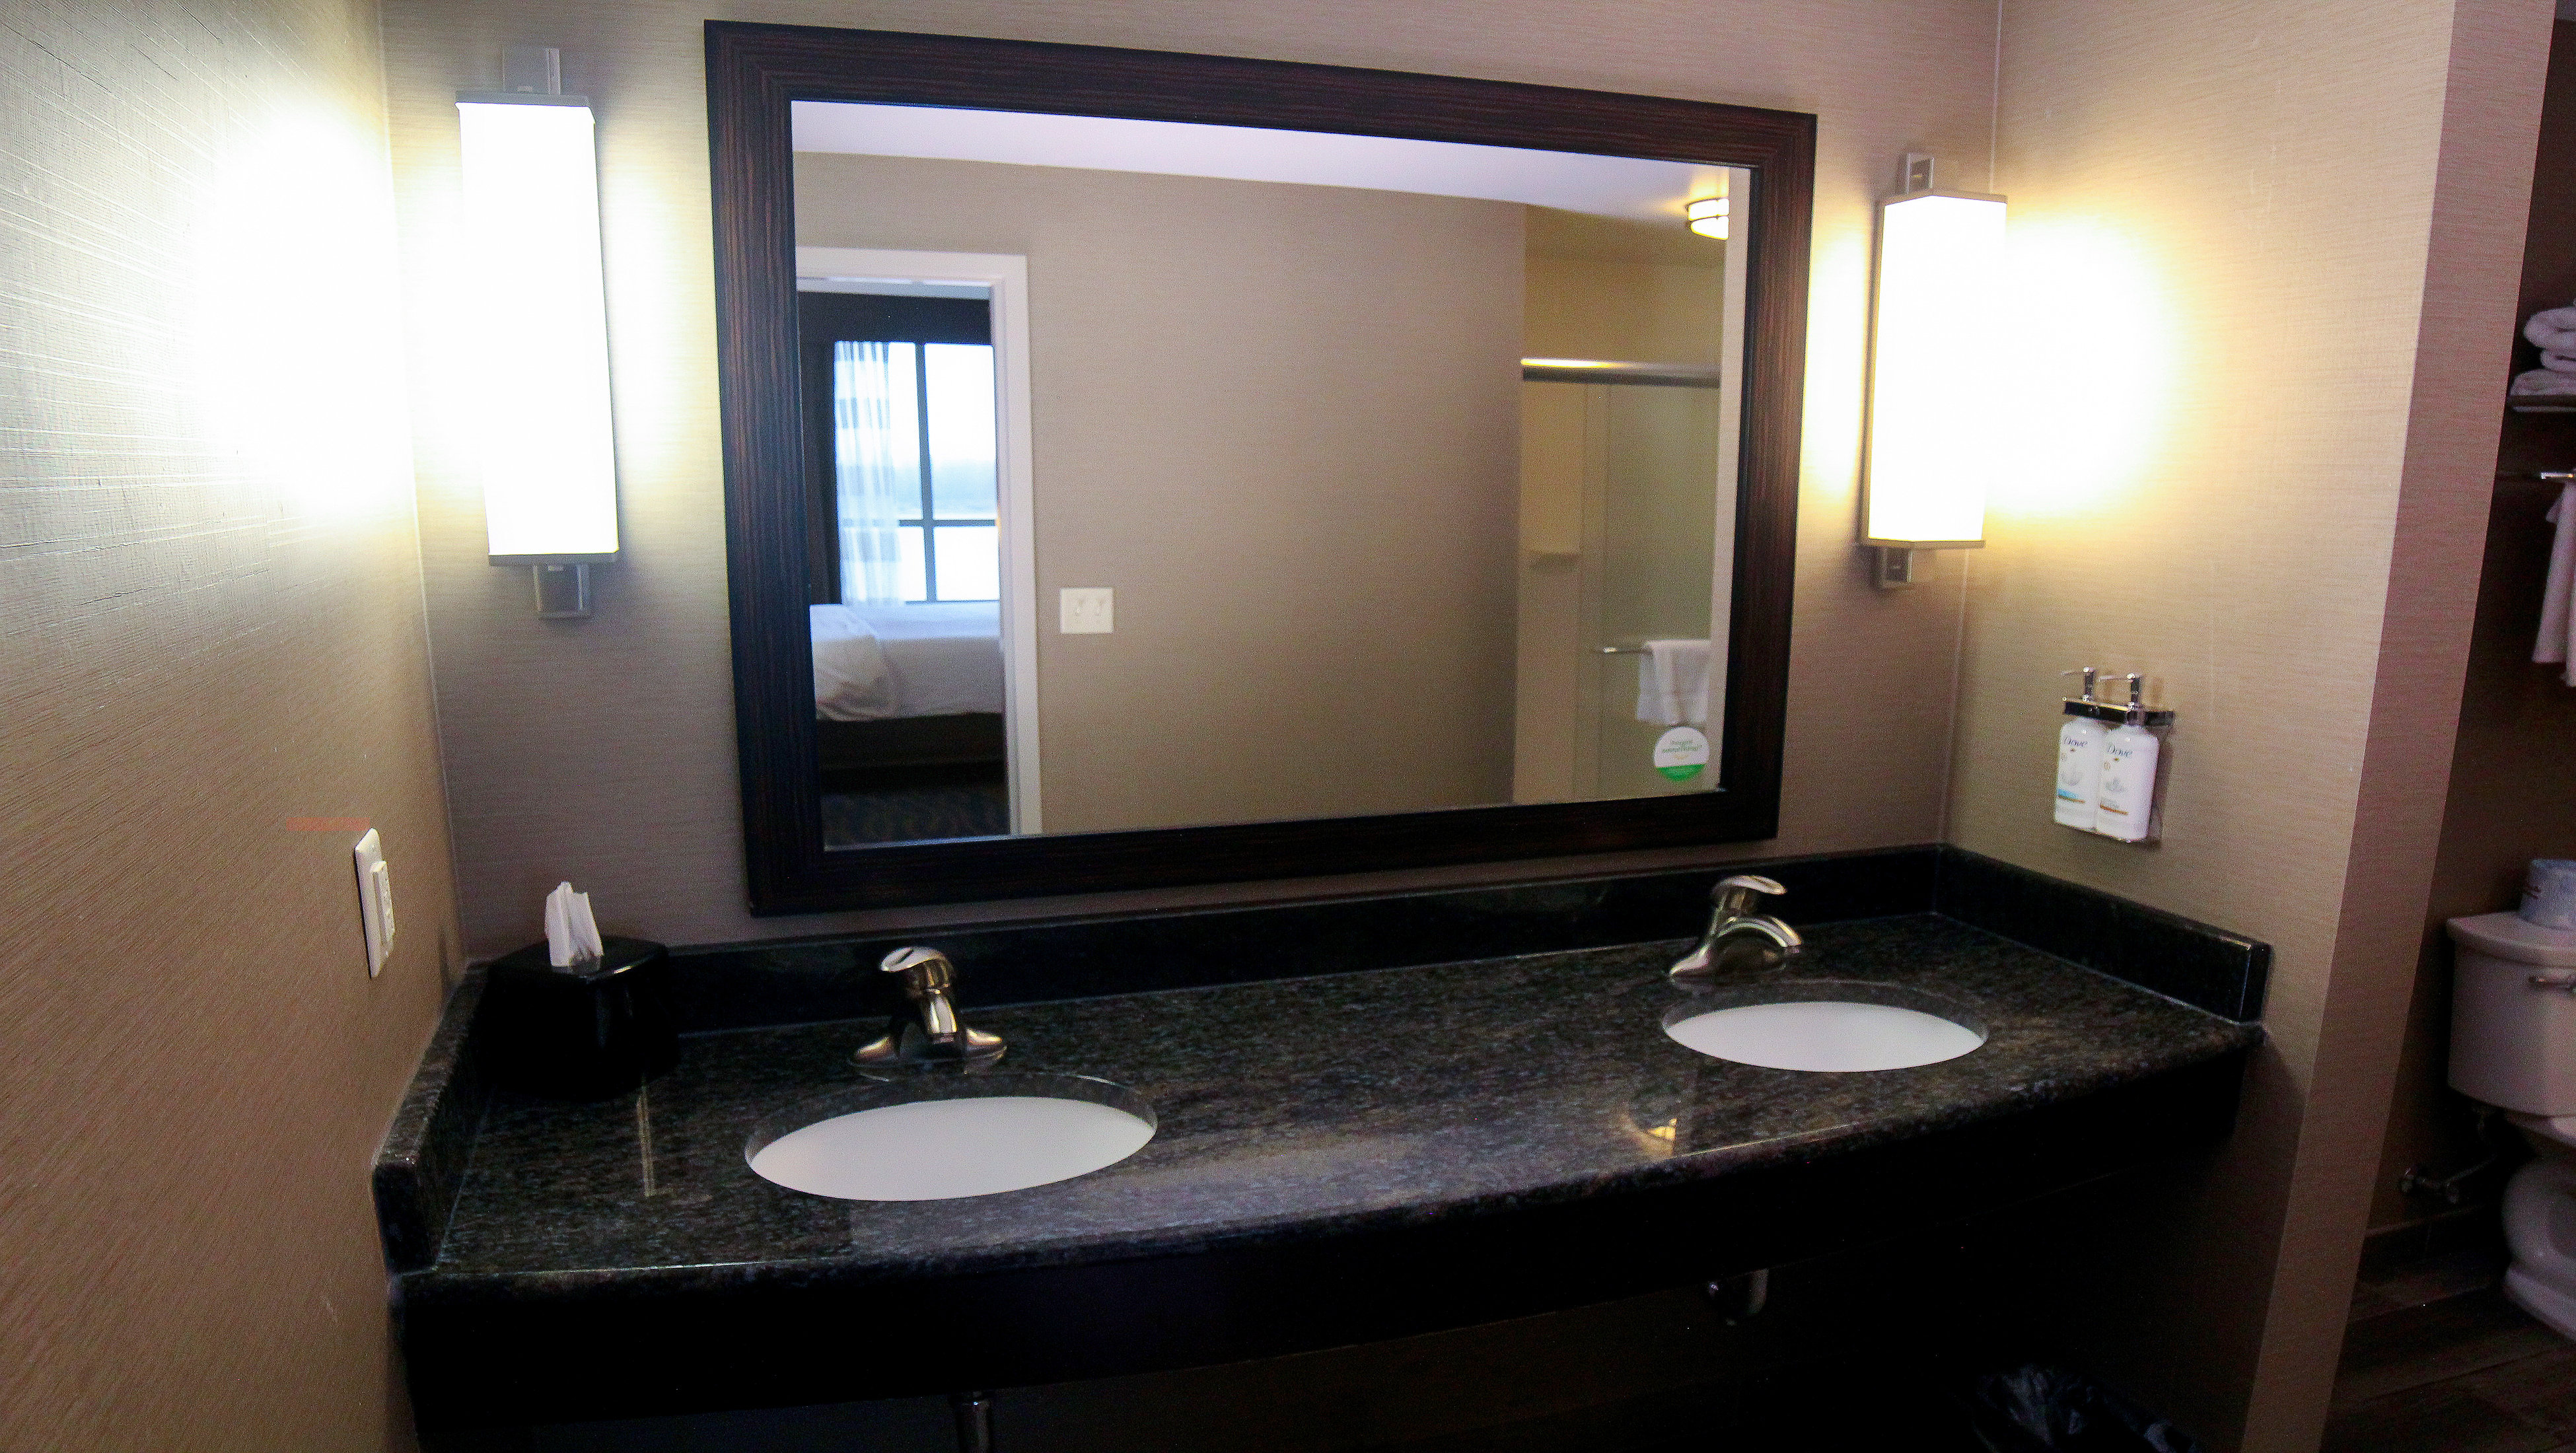 Our King Bedroom Suite offers two vanity sinks and dove products